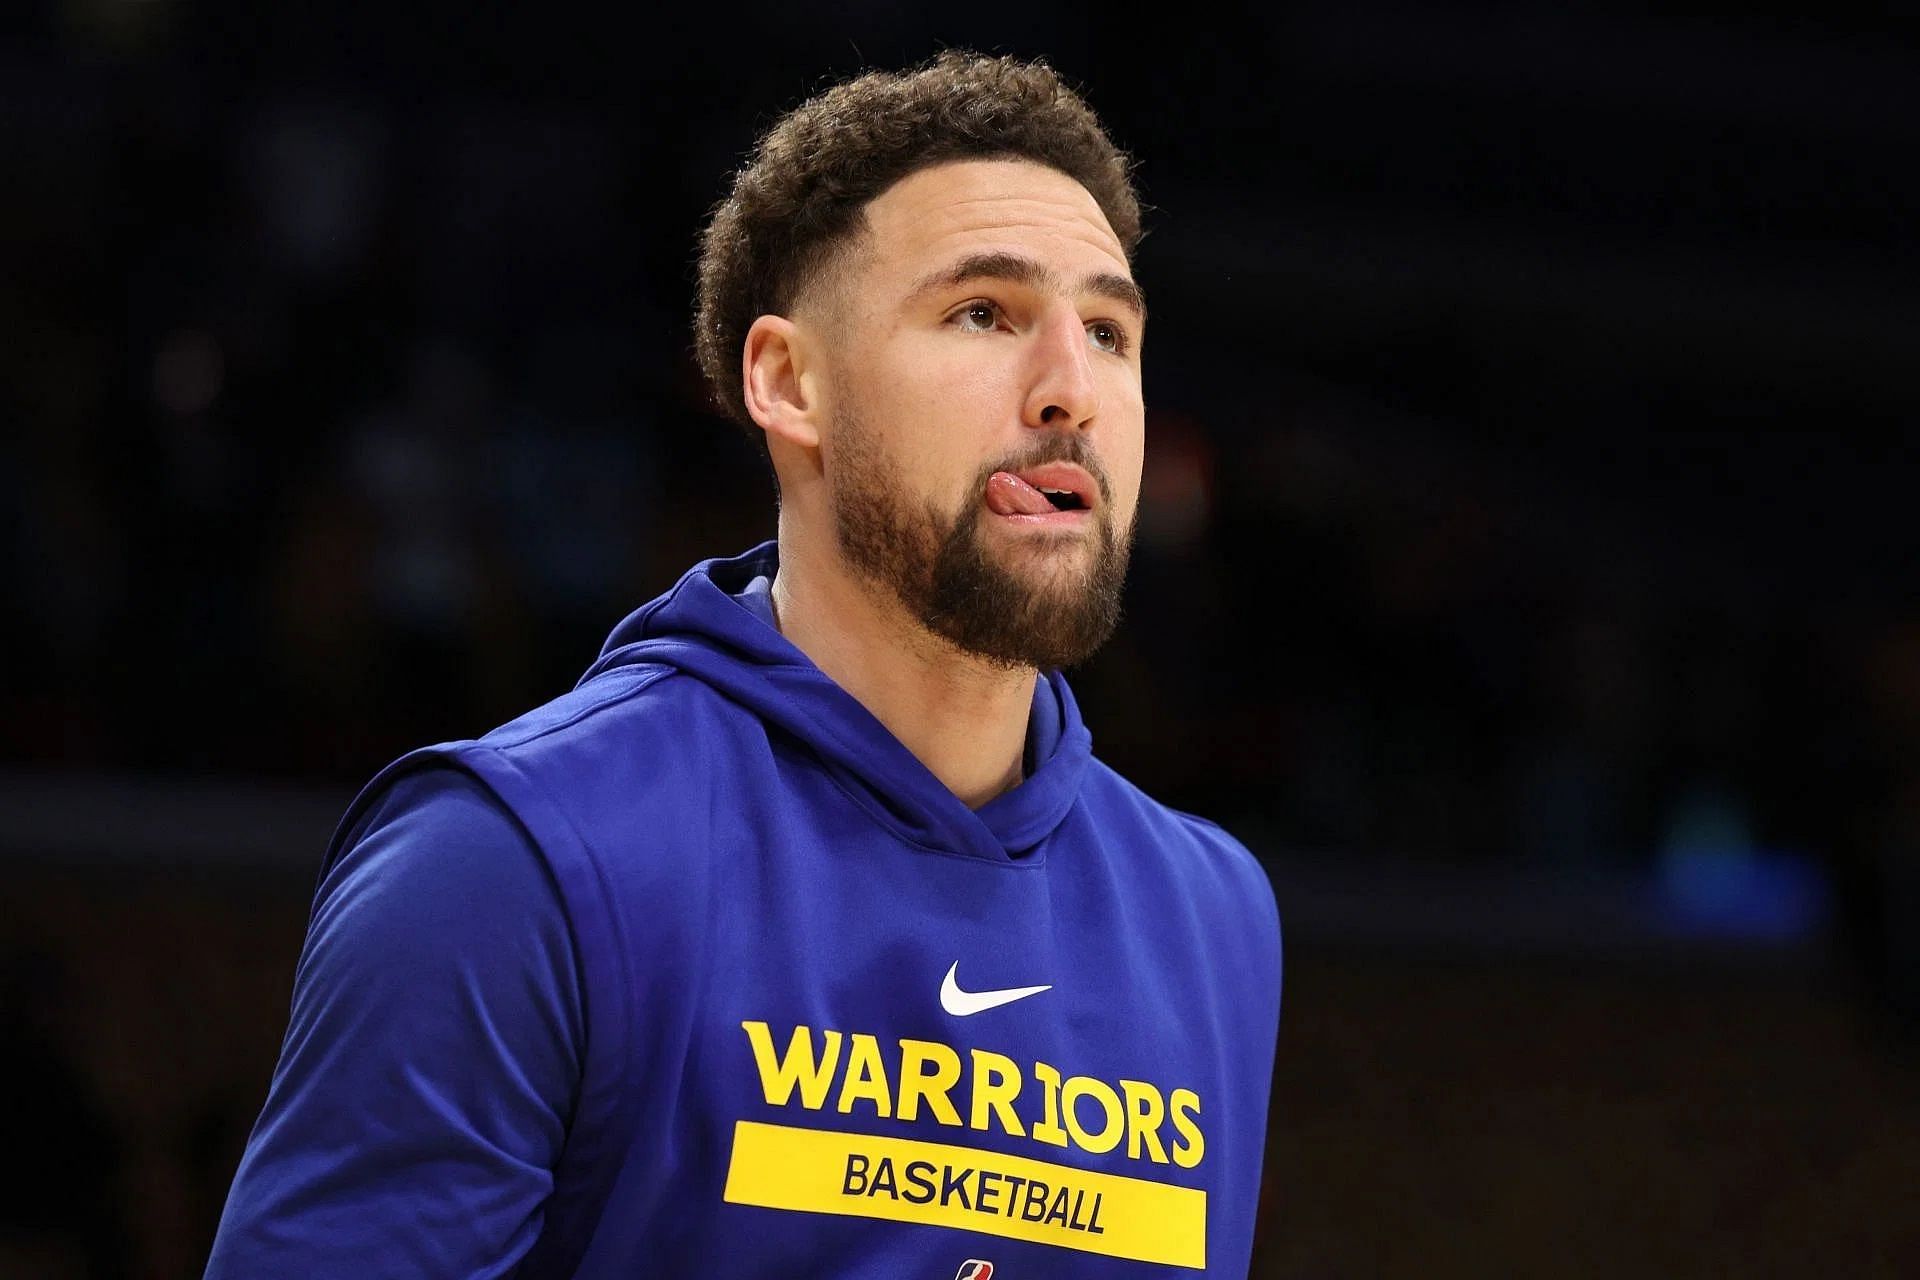 Golden State's Klay Thompson posts a celebration from the Bahamas